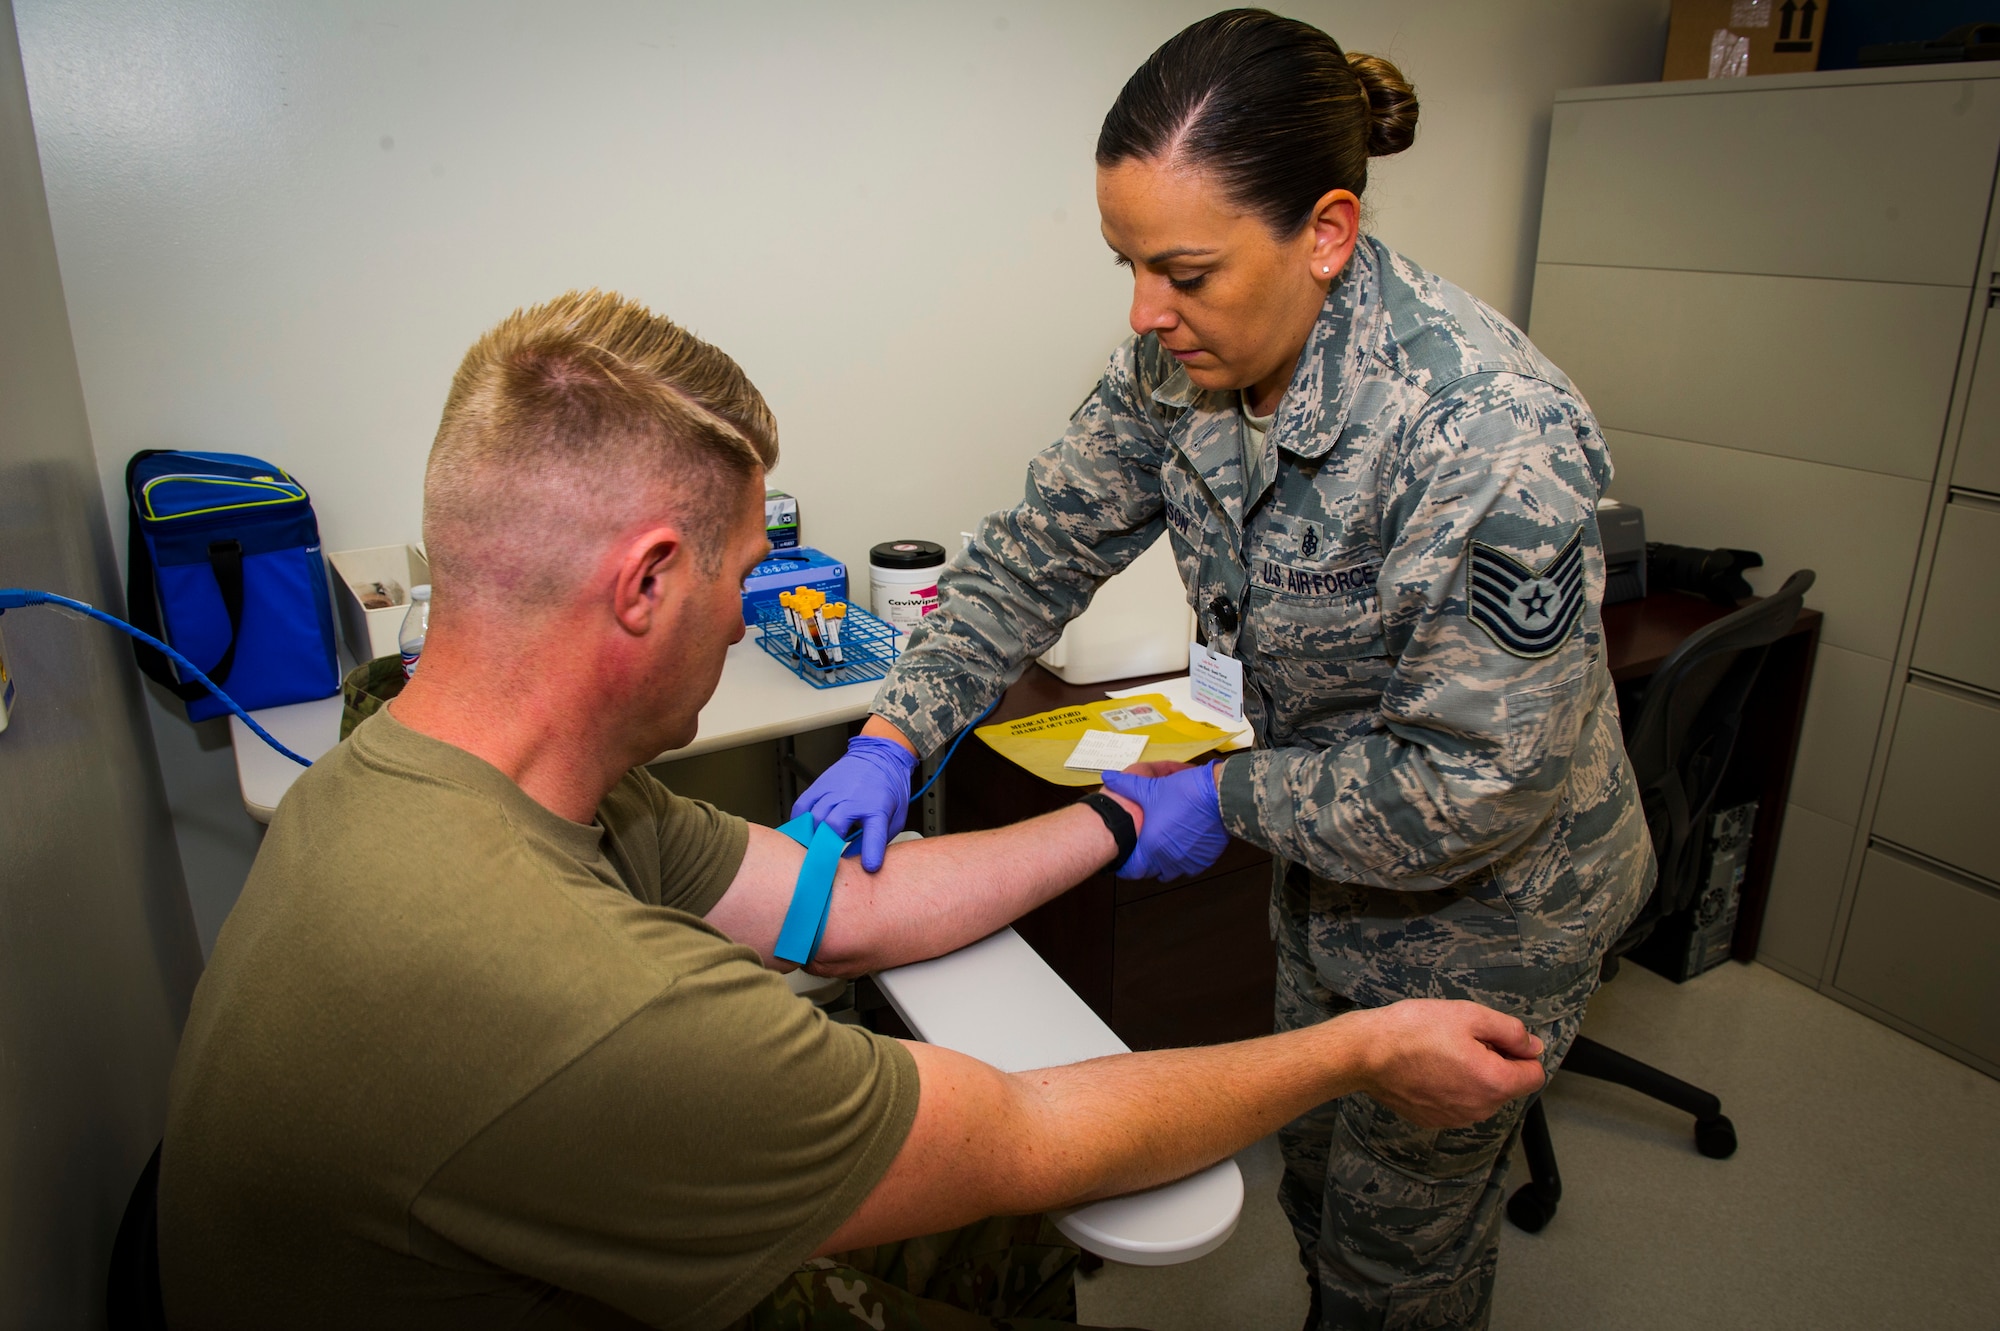 U.S. Air Force Tech Sgt. Leslie Robinson, 926th Aerospace Medicine Squadron medical lab technician, preps Master Sgt. Nicholas Hicks, 926th Aircraft Maintenance Squadron viper aircraft maintenance unit flight chief, to have blood drawn inside the medical clinic at Nellis Air Force Base, Nevada, July 13, 2019. The 926th AMDS provides flight medical support and medical manpower to accomplish the Reserve Component Physical Health Assessment Process for the wing population to ensure units’ medical requirements for deployment are met.. The 926 AMDS works cohesively to ensure all reserve personnel assigned are medically and operationally ready to fulfill the wing’s mission. (U.S. Air Force photo by Senior Airman Brett Clashman)